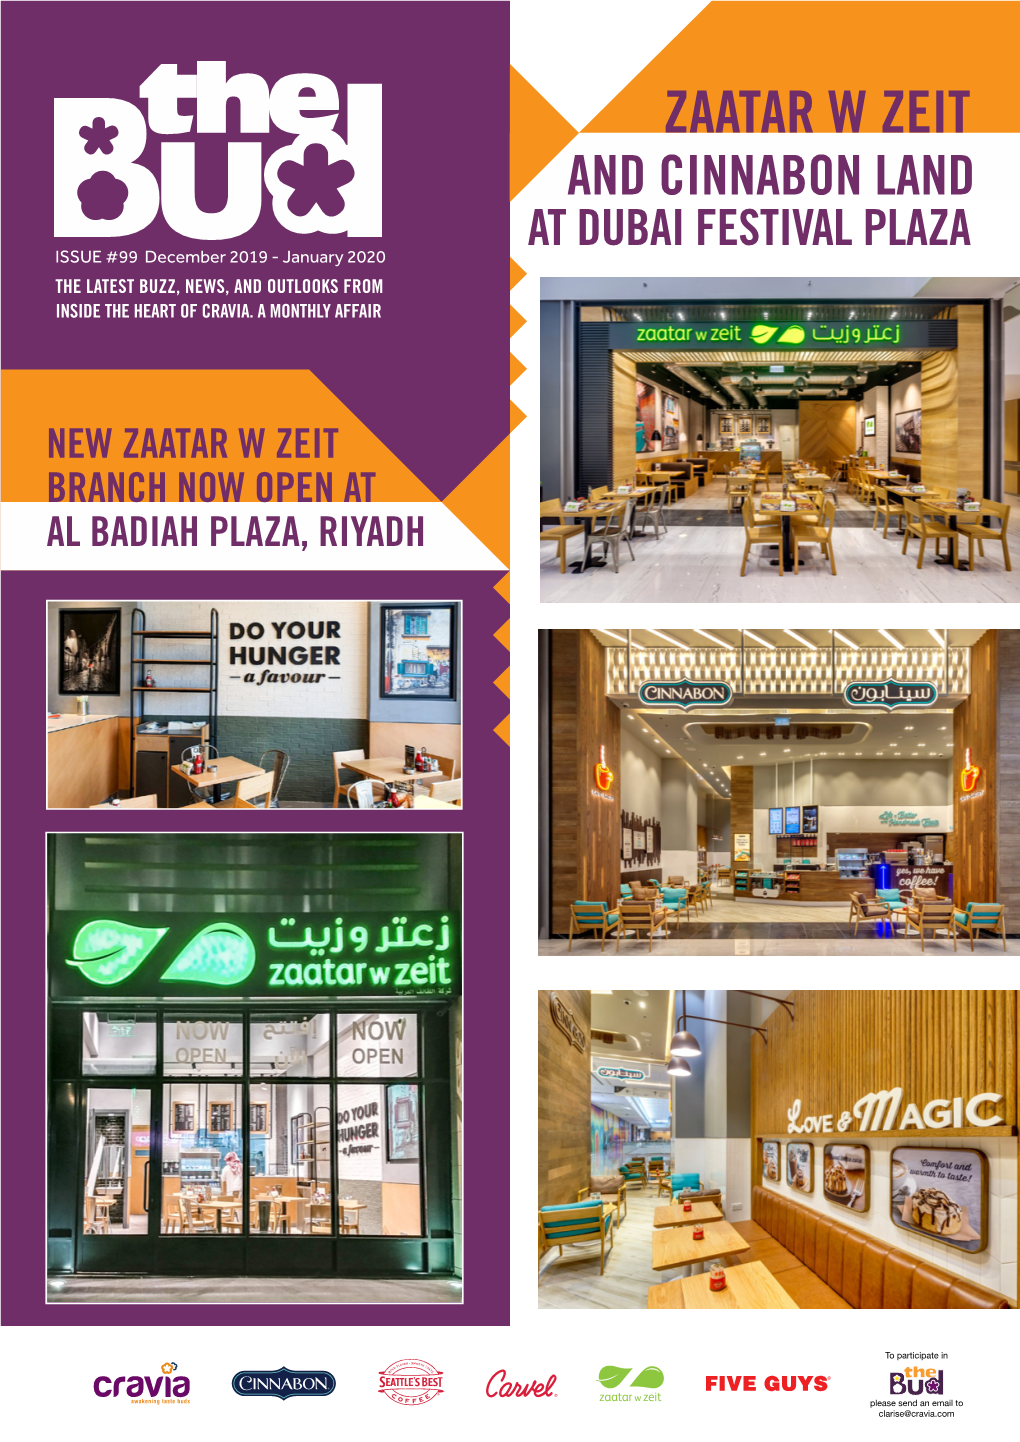 ZAATAR W ZEIT and CINNABON LAND at DUBAI FESTIVAL PLAZA ISSUE #99 December 2019 - January 2020 the LATEST BUZZ, NEWS, and OUTLOOKS from INSIDE the HEART of CRAVIA